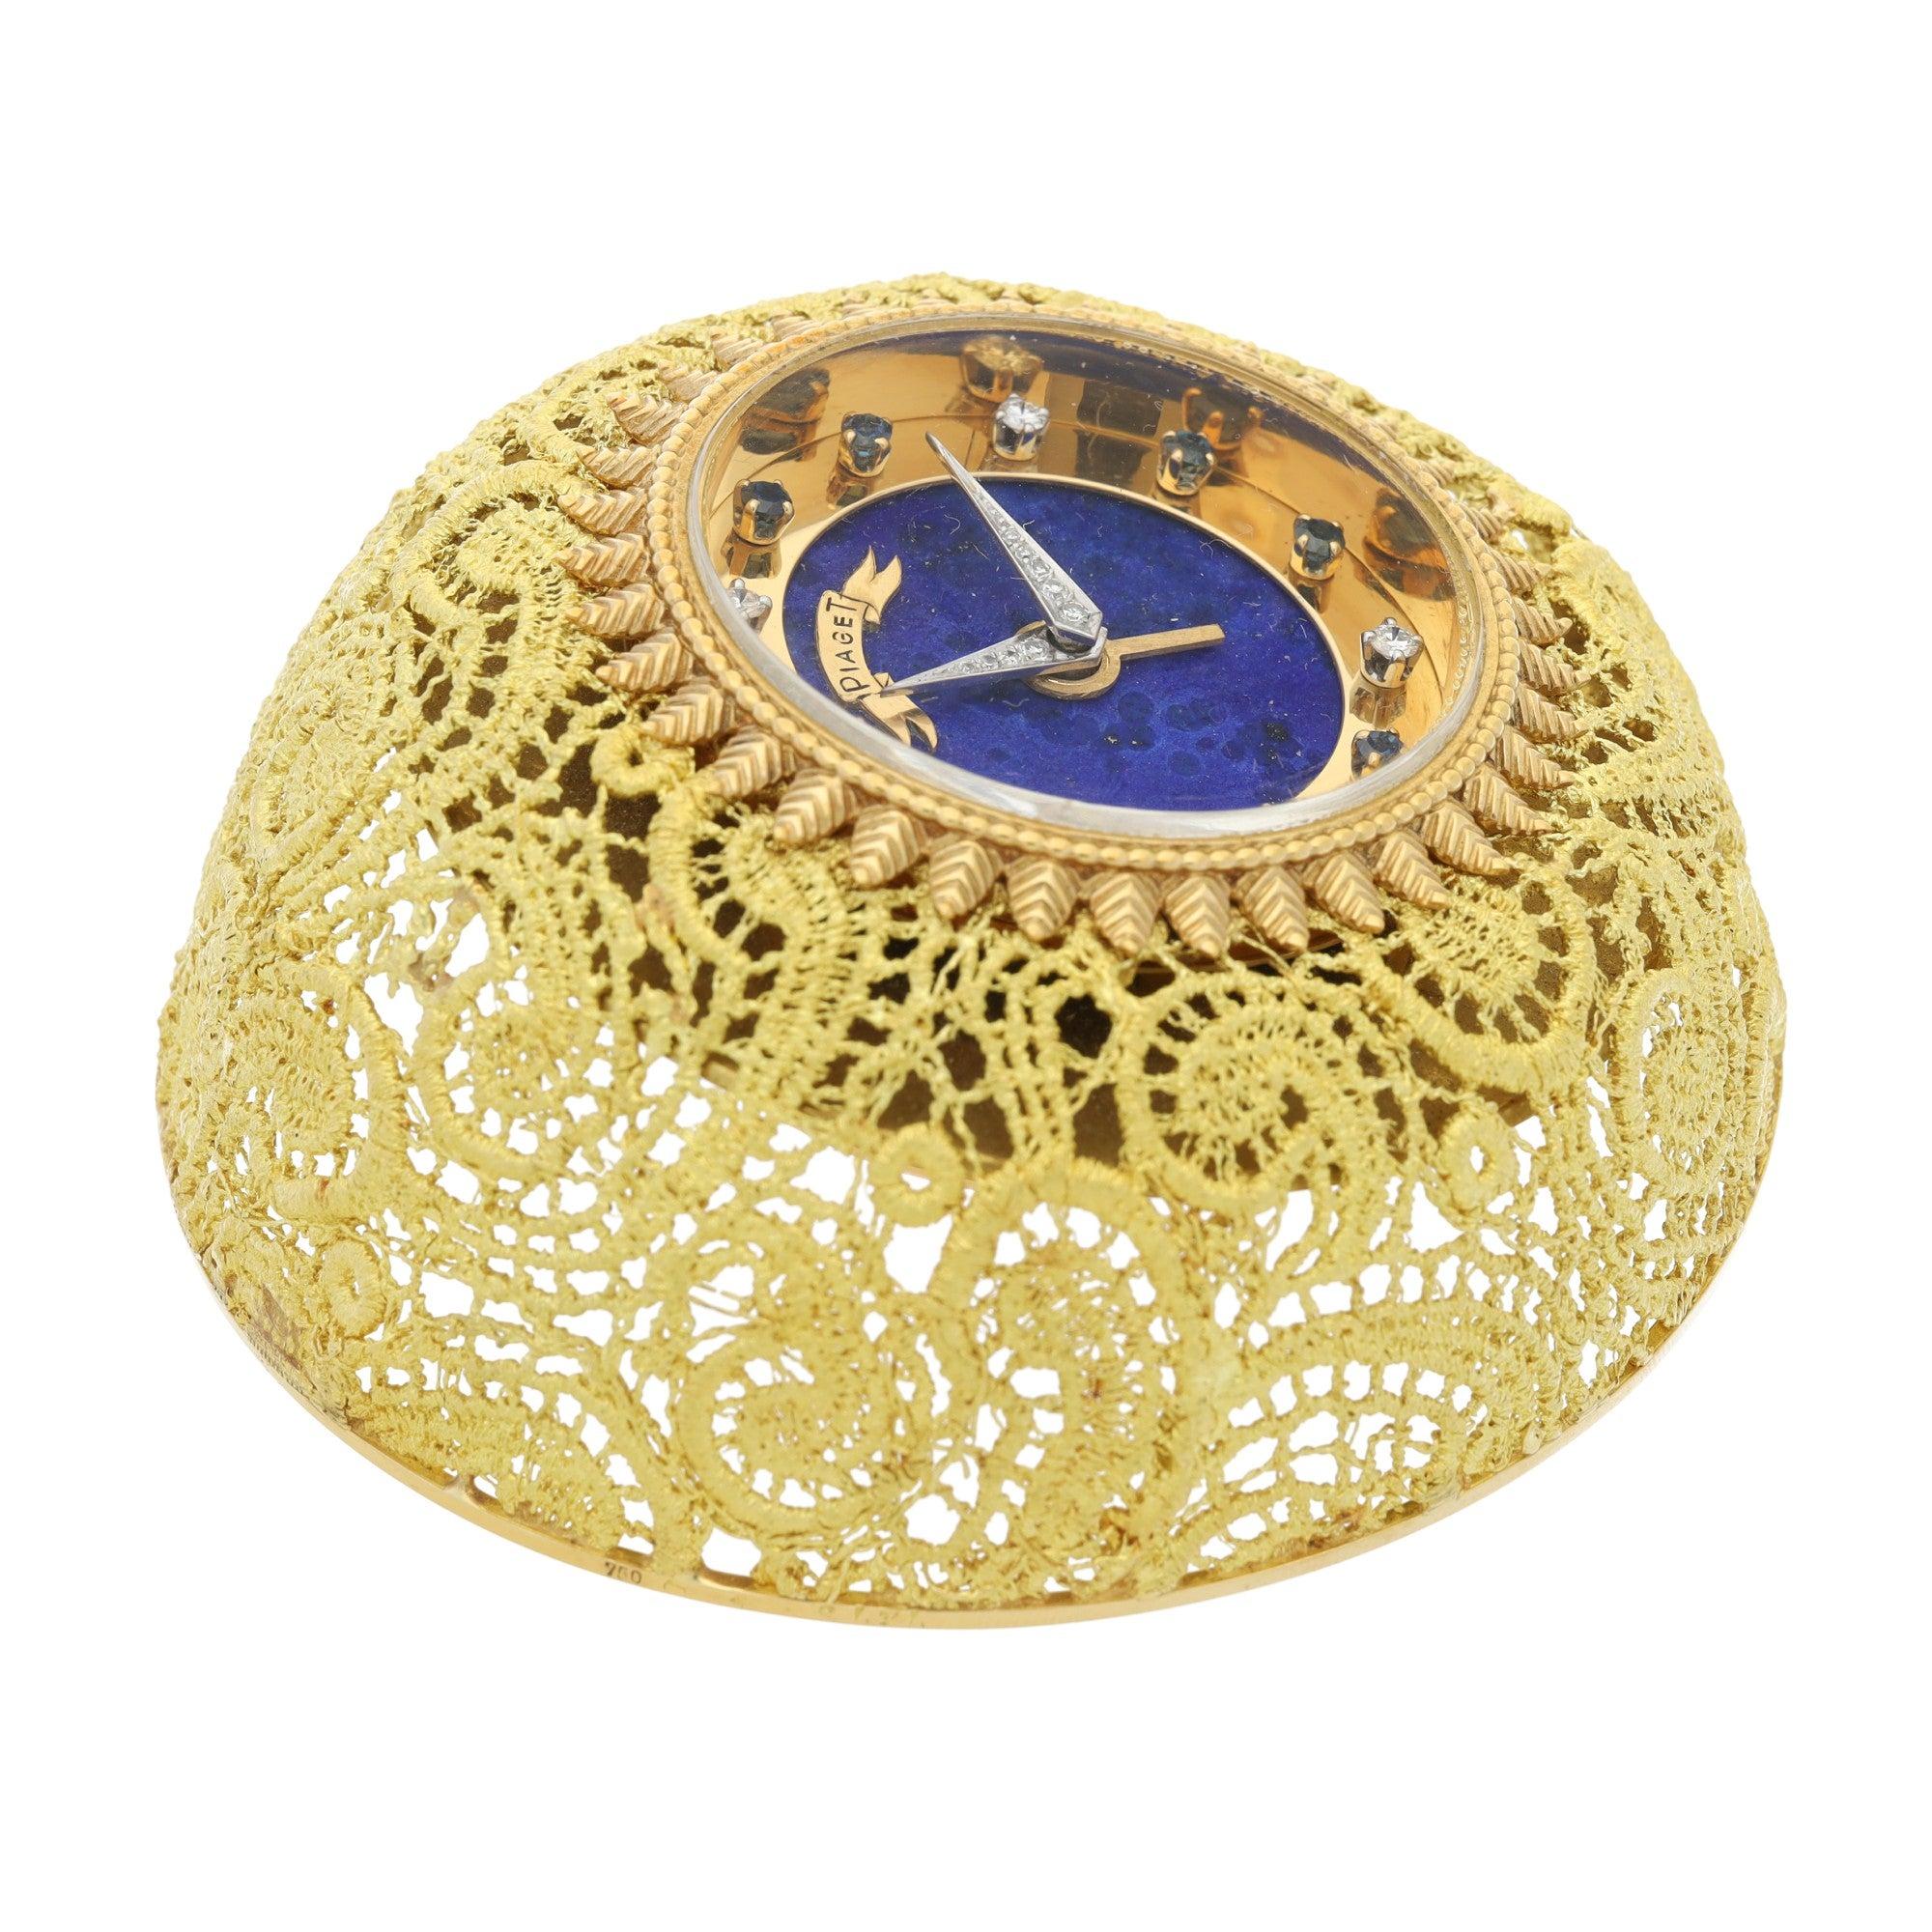 Piaget Gold and Lapis Desk Clock In Excellent Condition For Sale In New York, NY